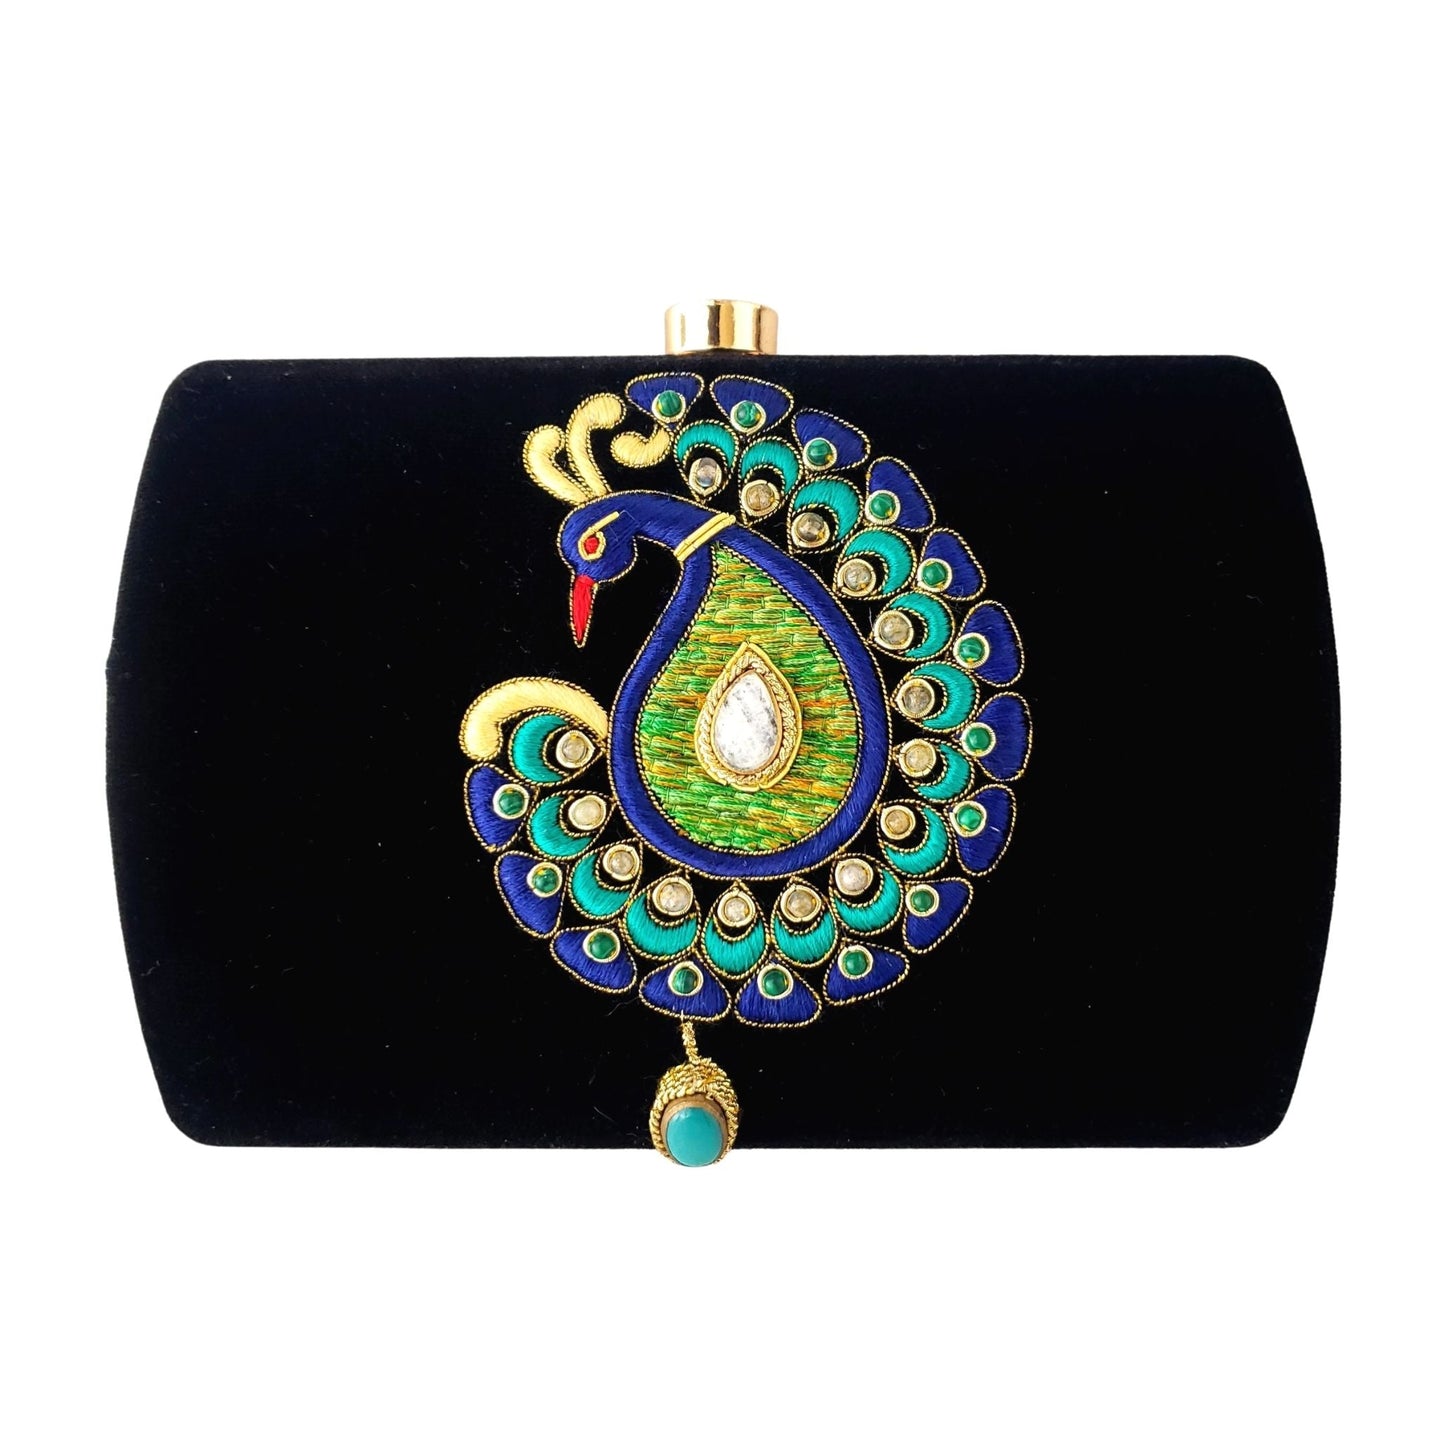 Luxury black velvet hardcase clutch embroidered with colorful peacock and embellished with moonstone and turquoise stone. 